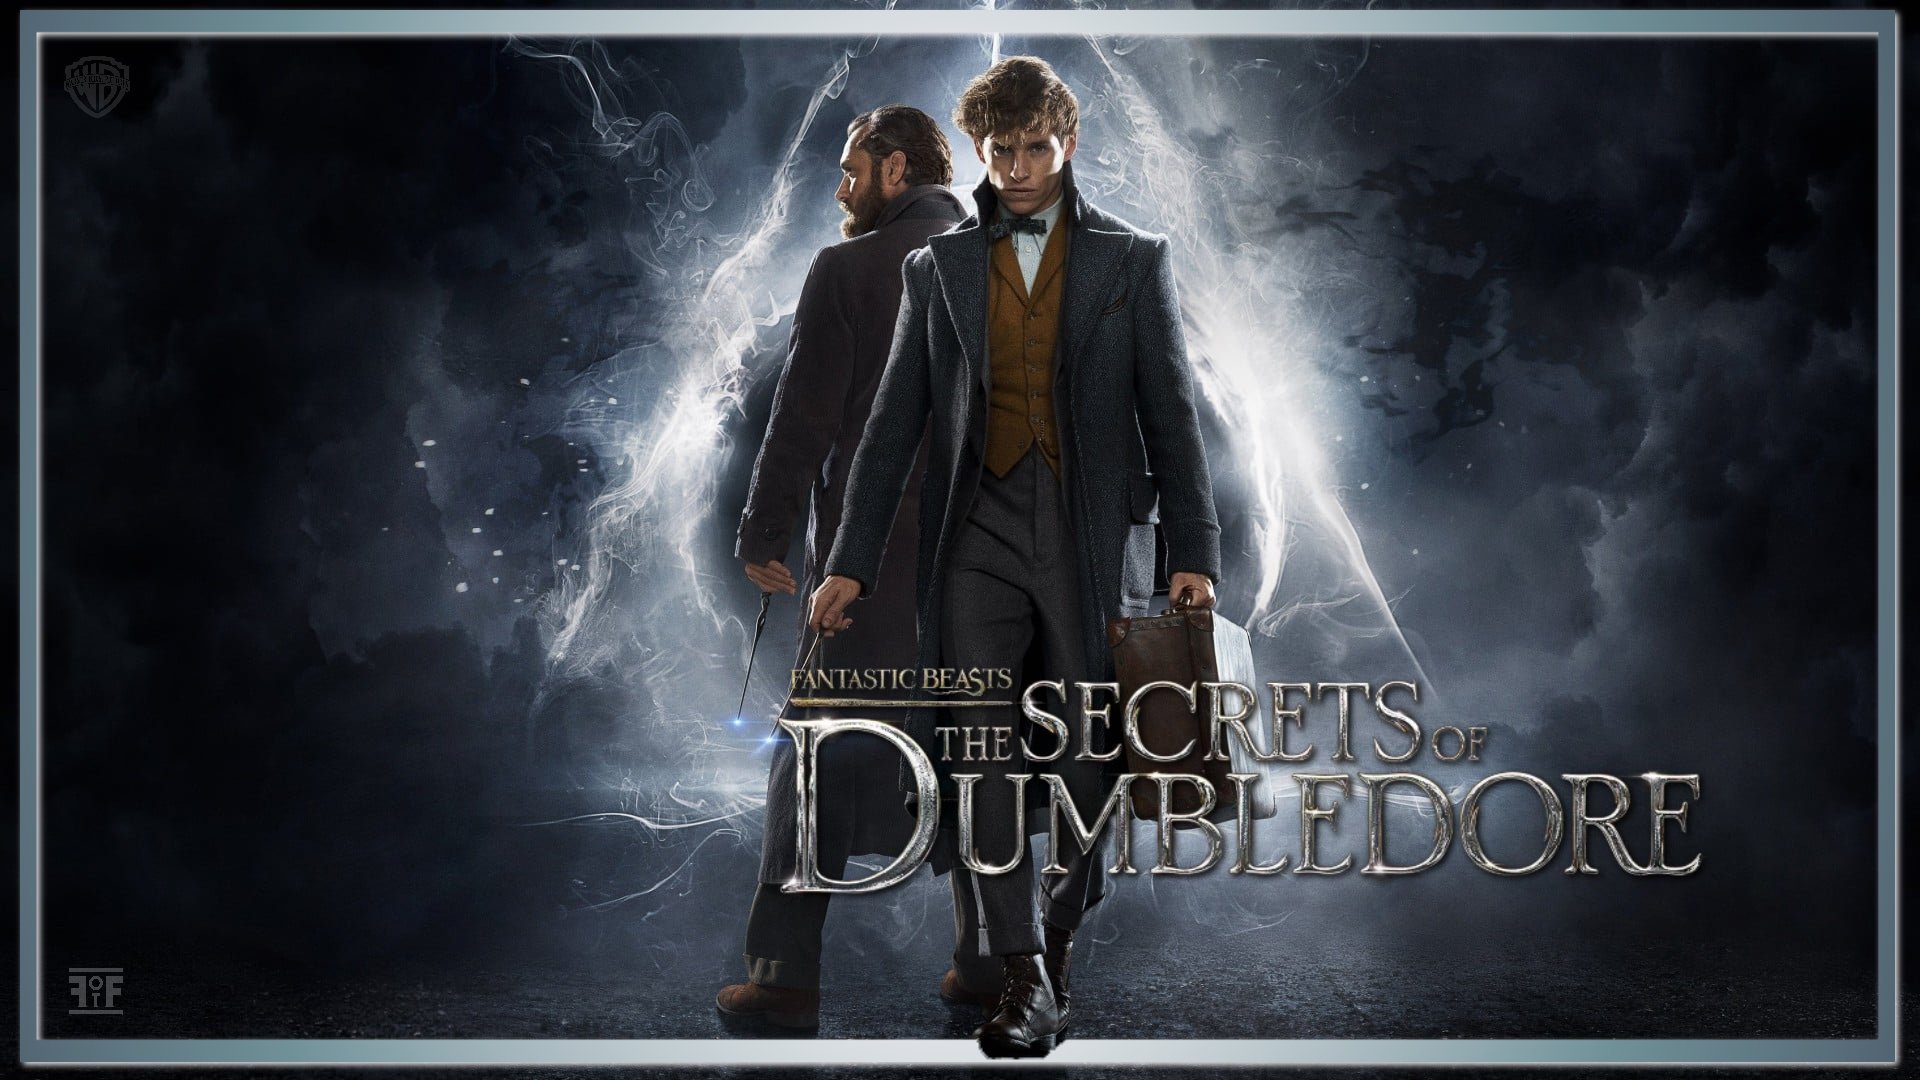 Fantastic Beasts: The Secrets Of Dumbledore Releases In April 2022 of the Force